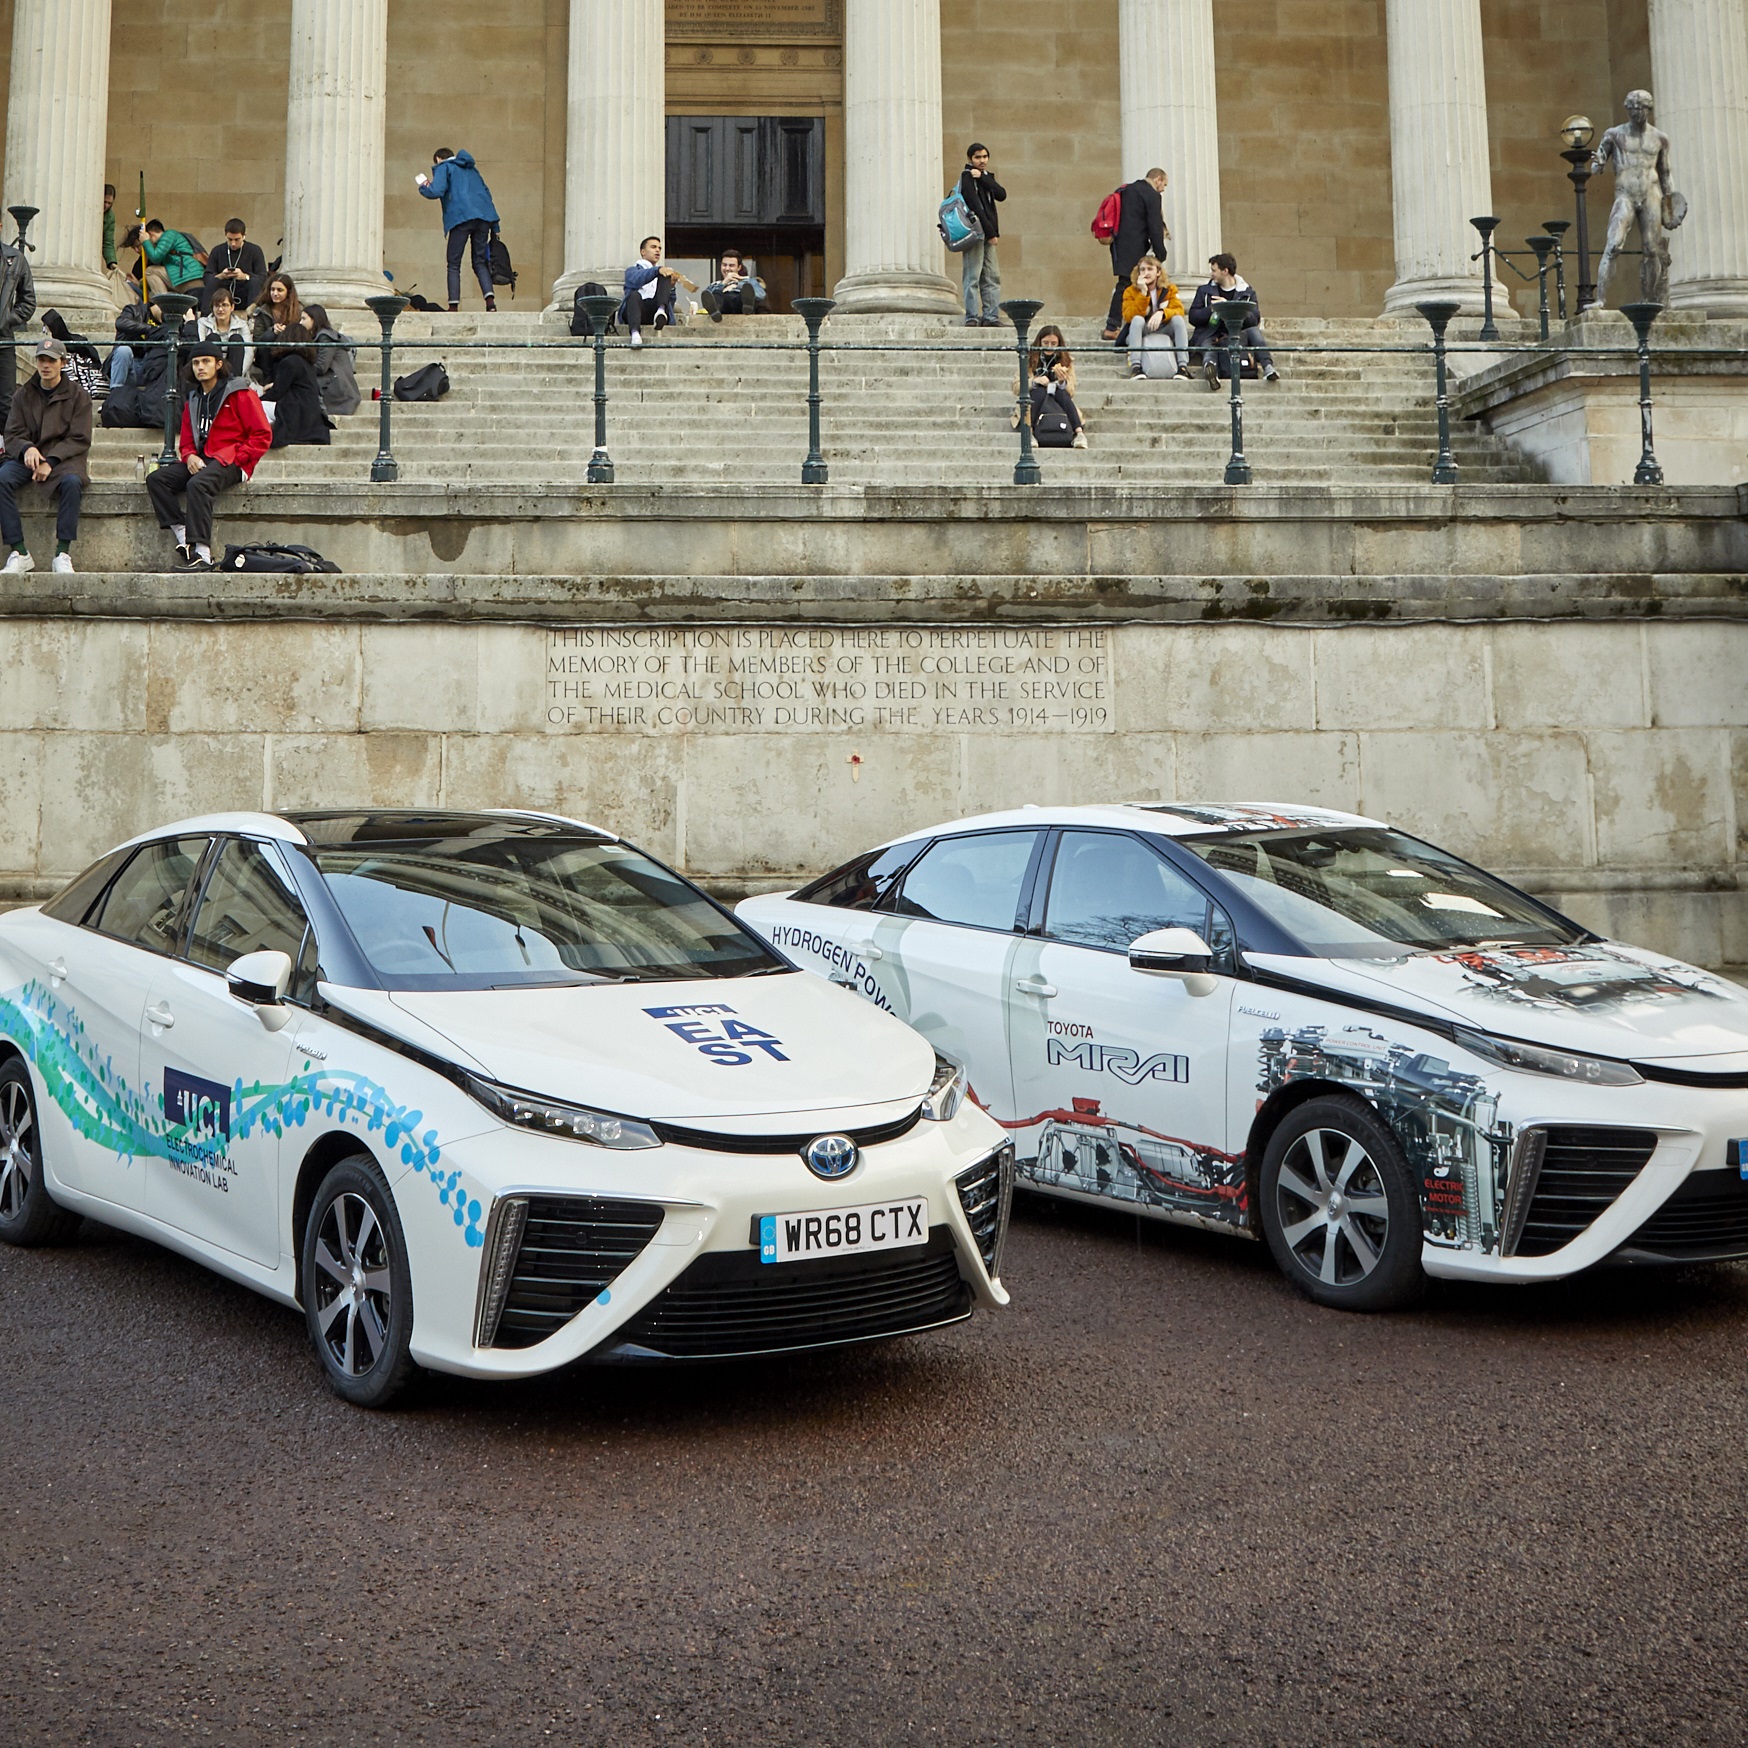 Toyota Mirai fuel cell vehicle outside UCL's main quad building